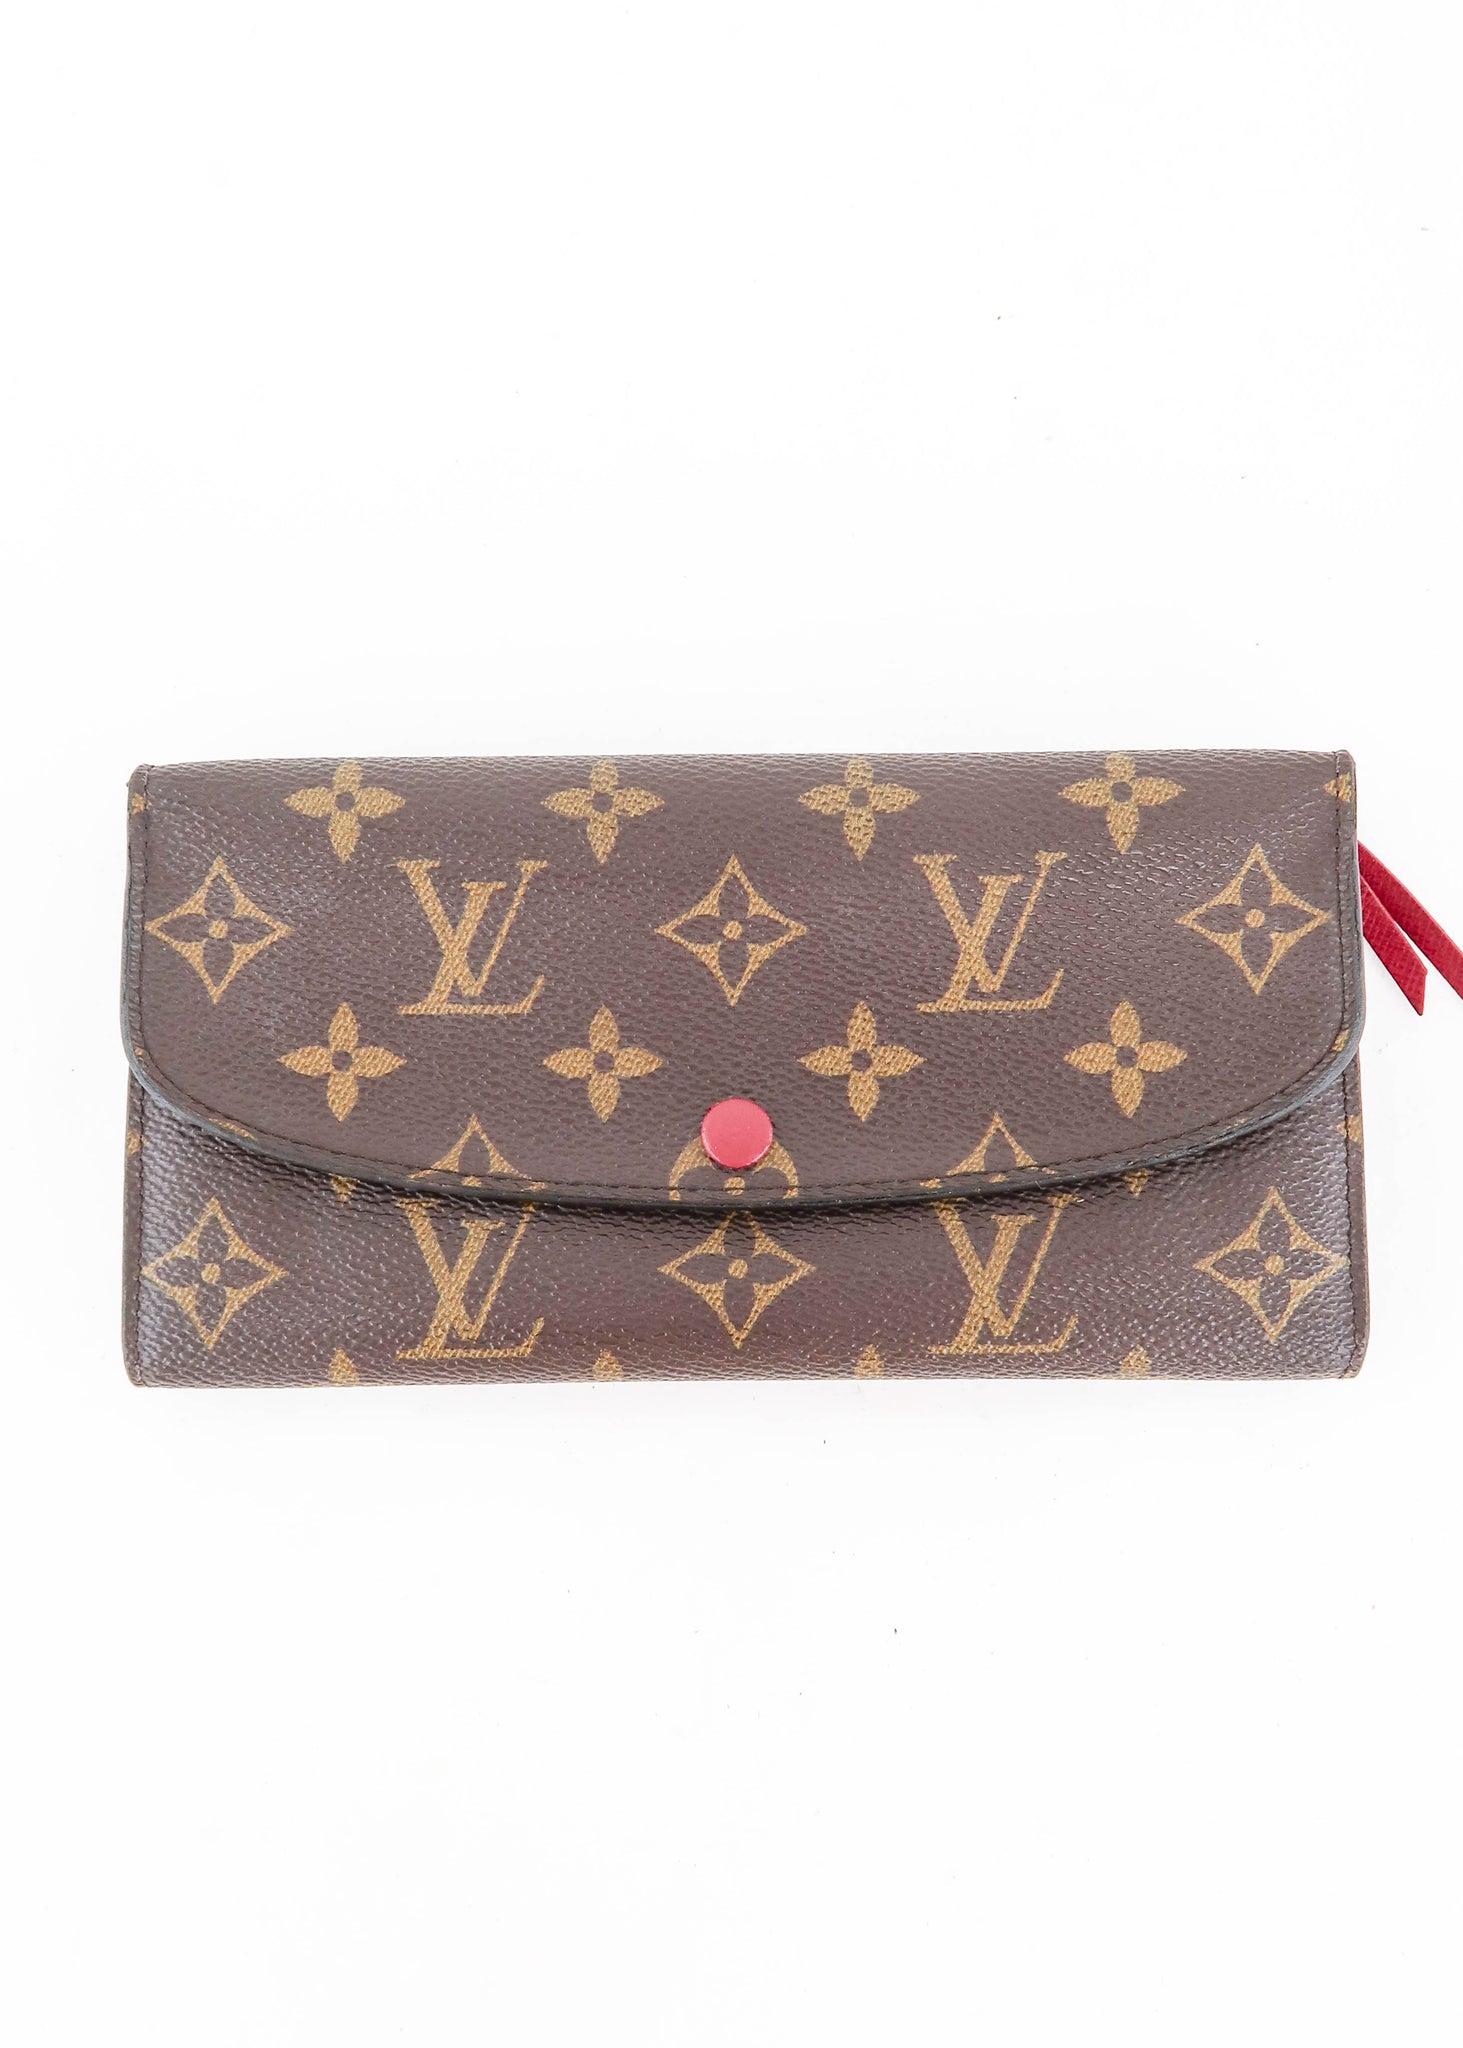 NWT Louis Vuitton Emilie Wallet, Monogram and Light Pink Coated Canvas